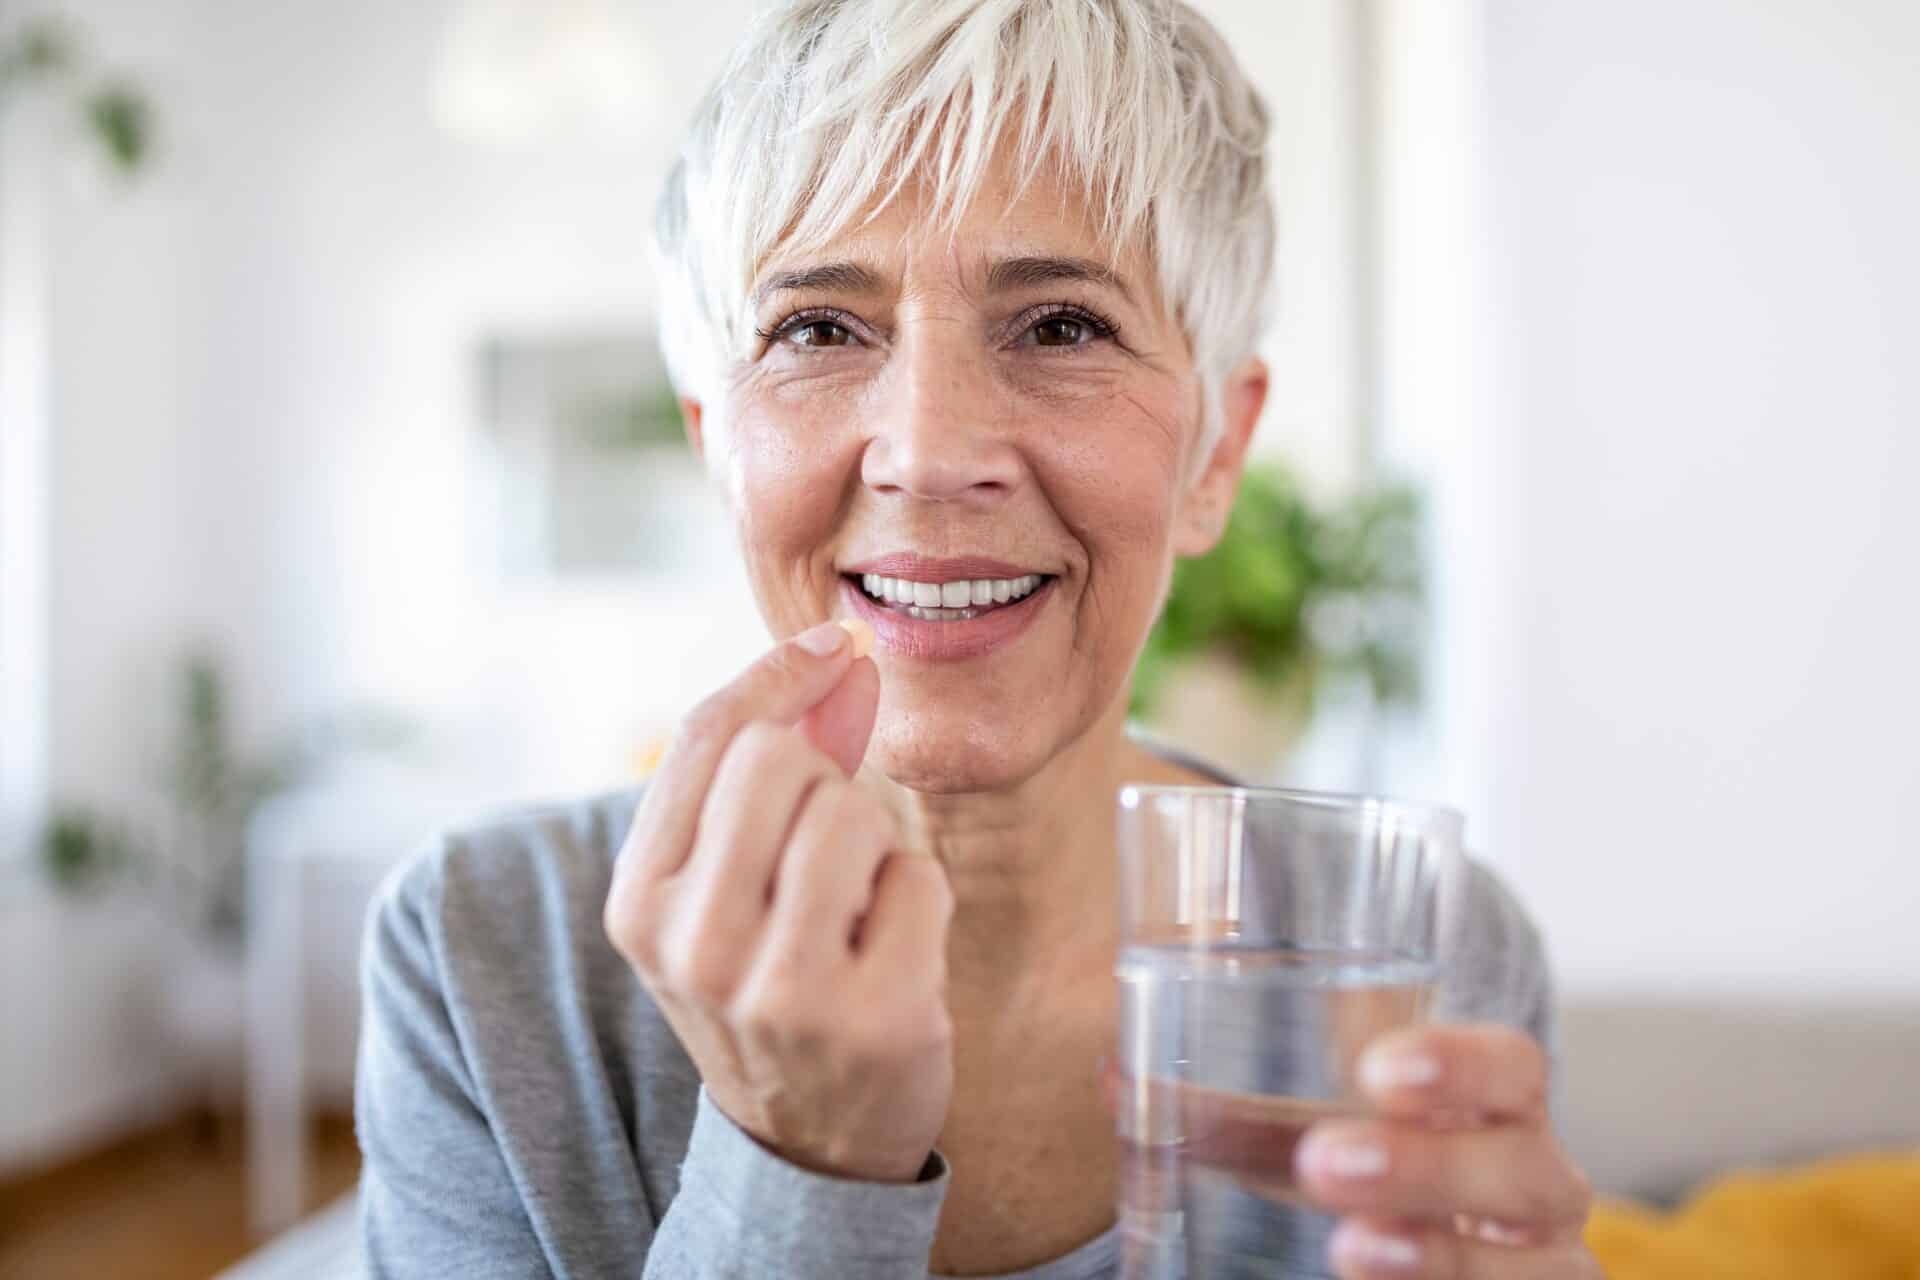 Smiling happy healthy middle aged 50s woman holding glass and pill